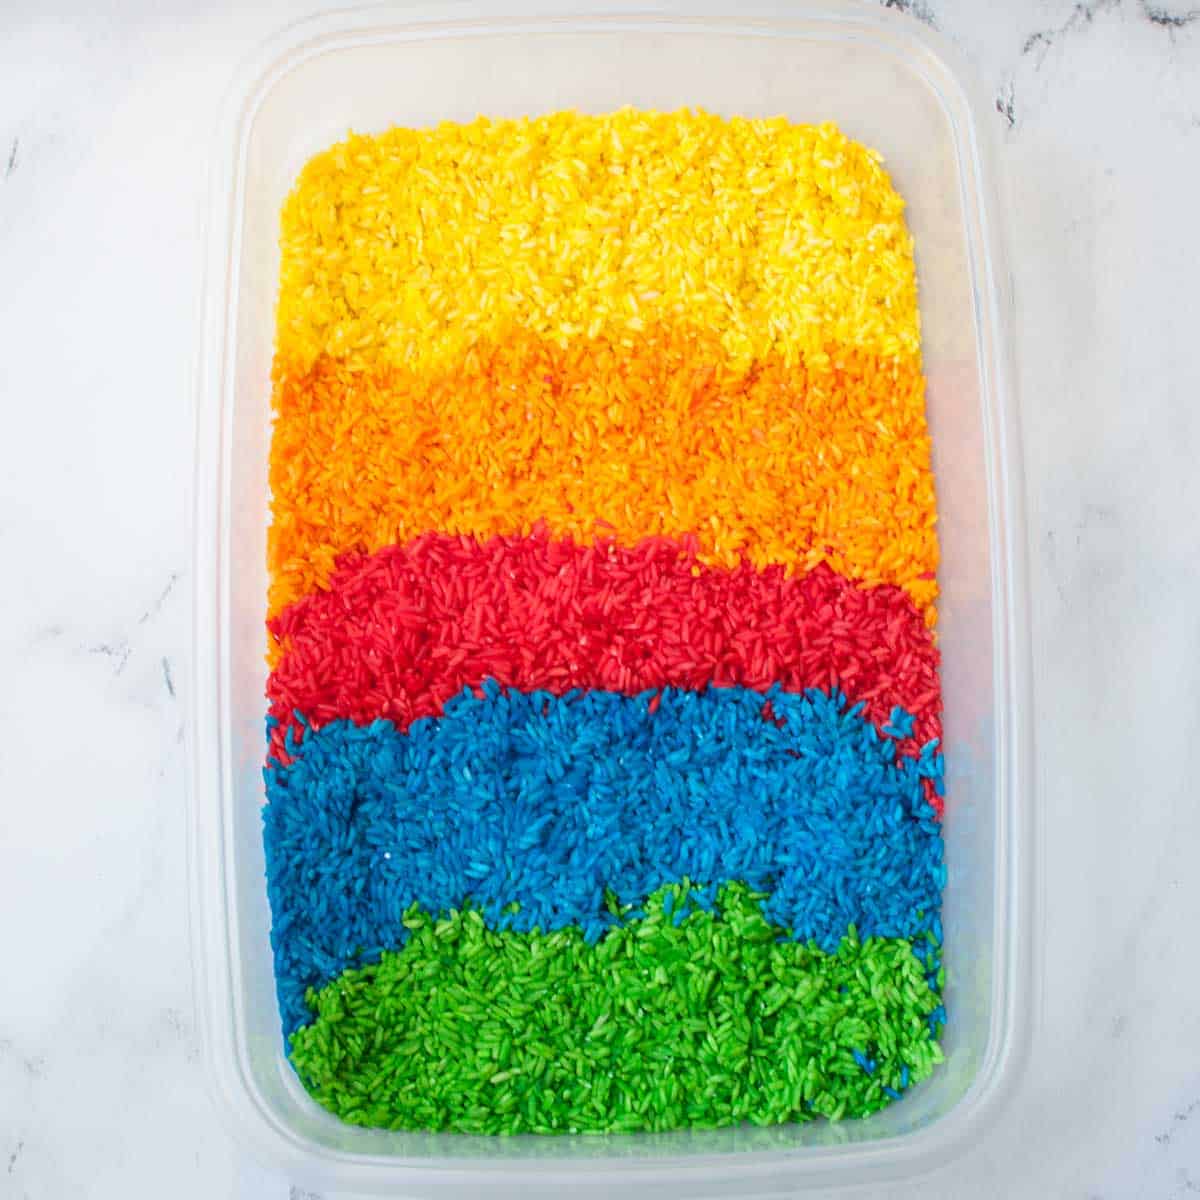 rice that has been dyed yellow, orange, red, blue, and green